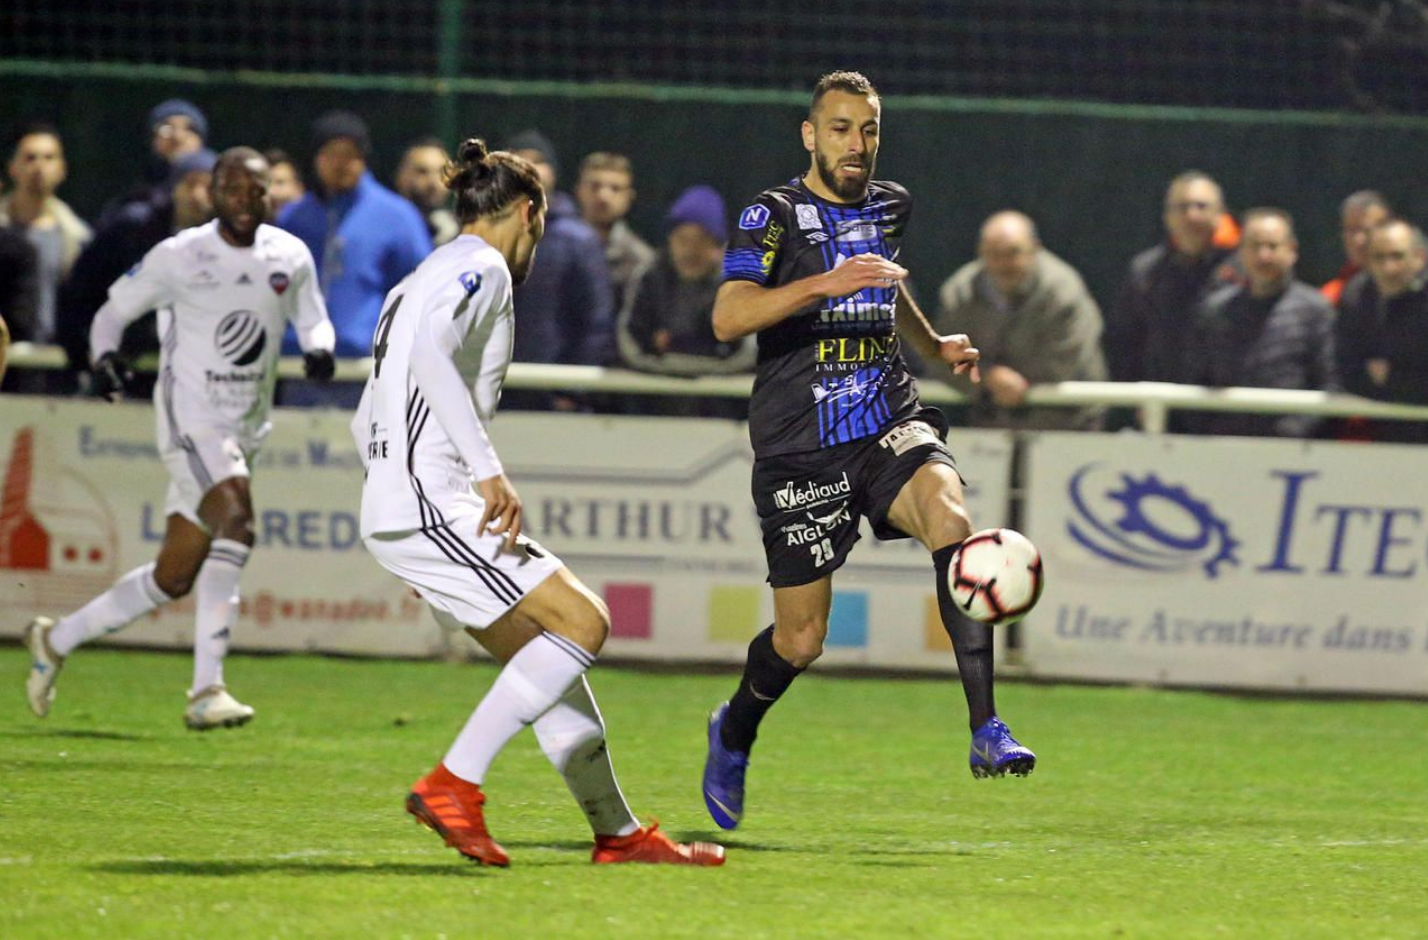 FC Chambly is getting closer and closer to the 2 league